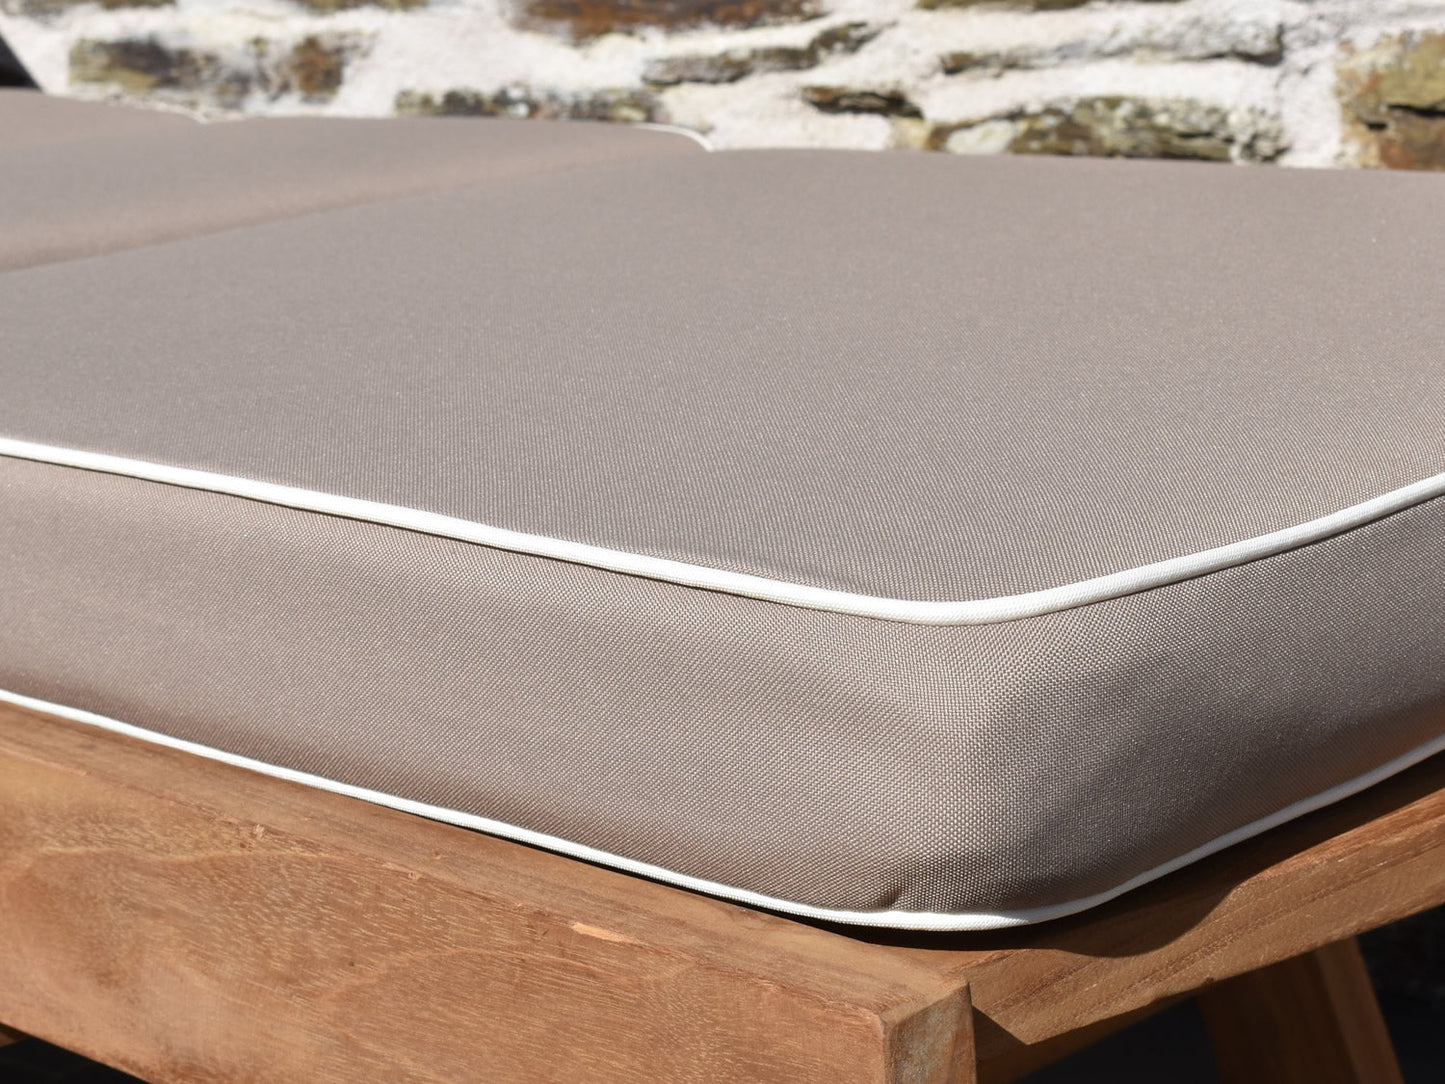 Close up detail of luxury sunlounger cushion taupe fabric with contrast white piping